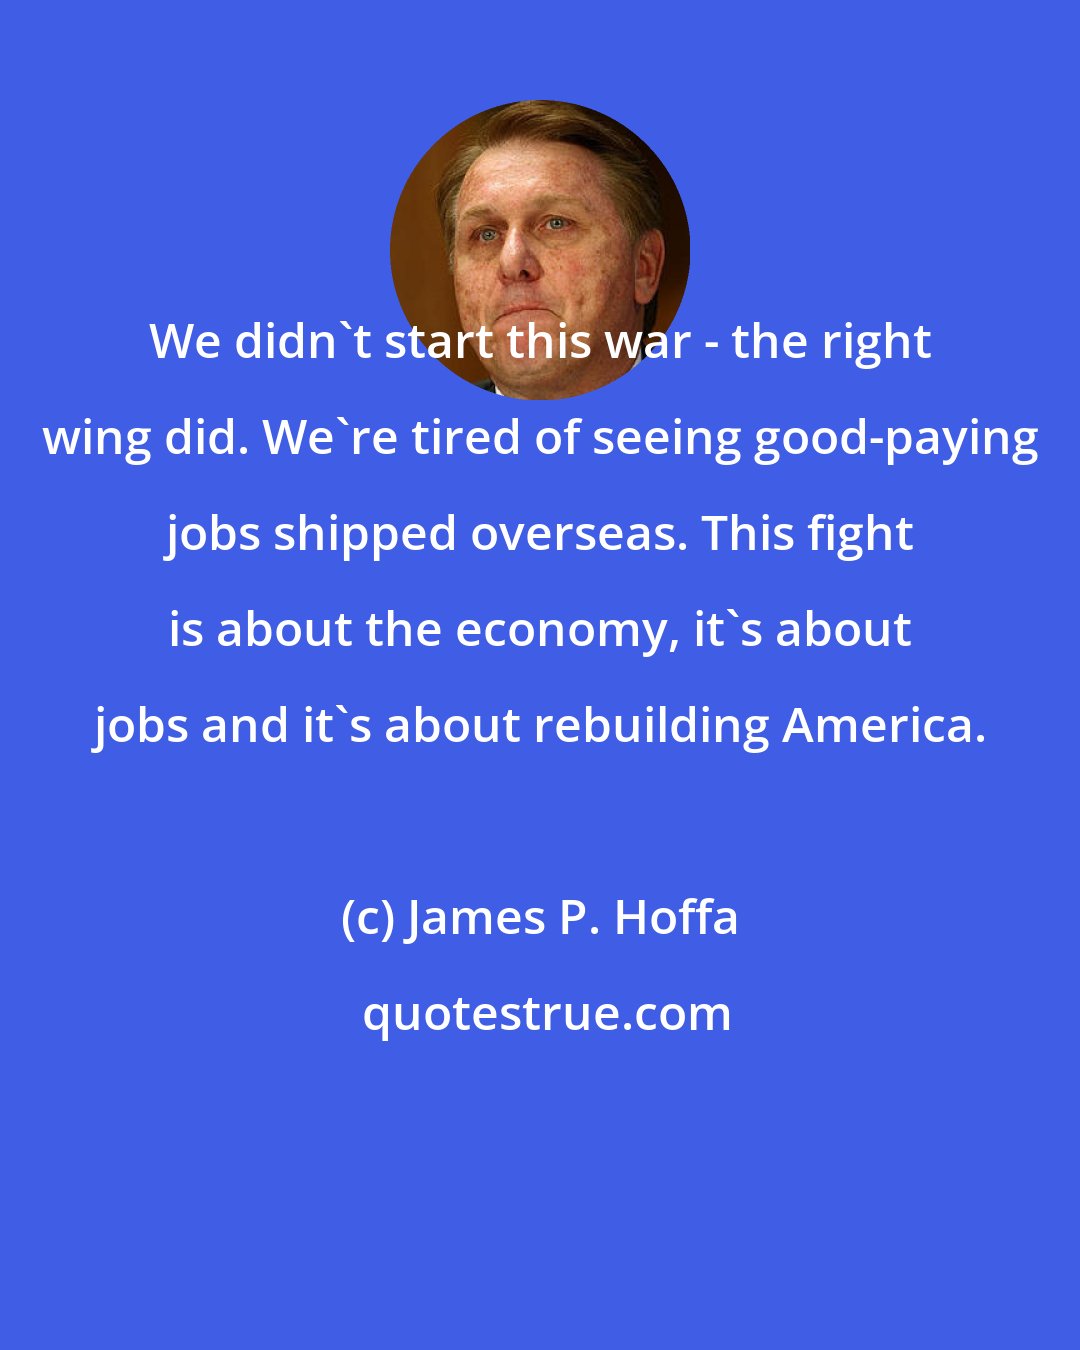 James P. Hoffa: We didn't start this war - the right wing did. We're tired of seeing good-paying jobs shipped overseas. This fight is about the economy, it's about jobs and it's about rebuilding America.